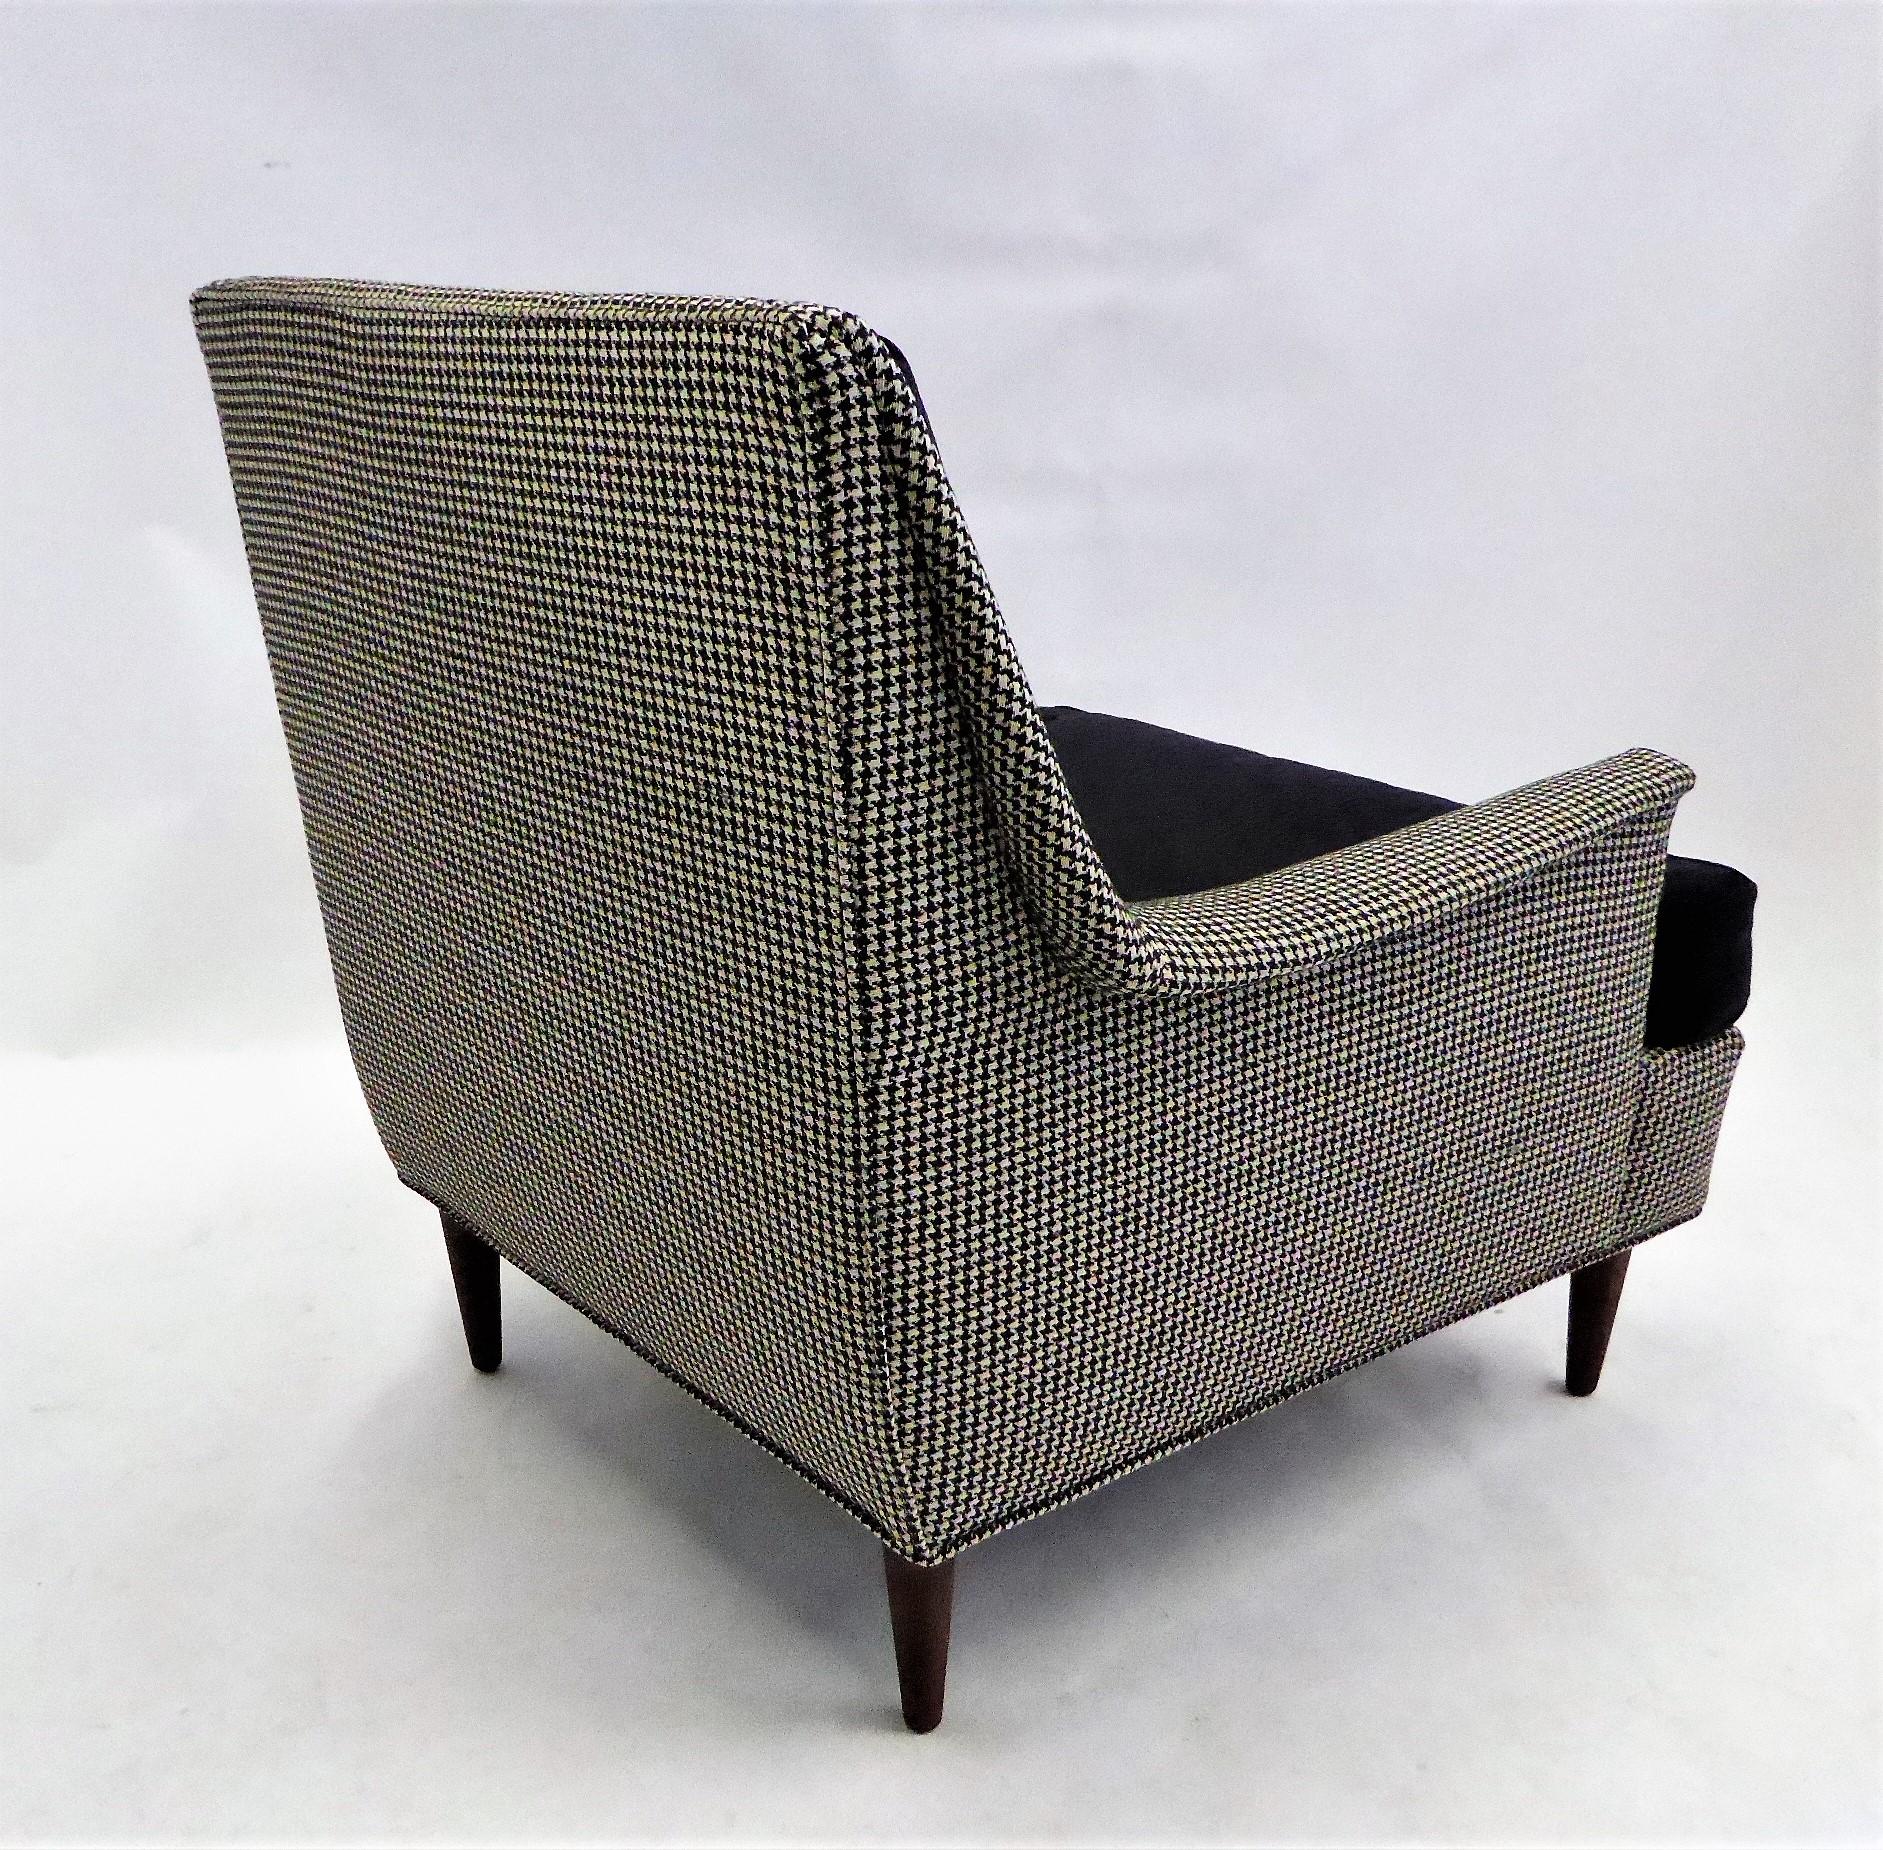 Mid-Century Modern 1950s Italian Inspired Lounge Chair in Black and White Houndstooth Fabric